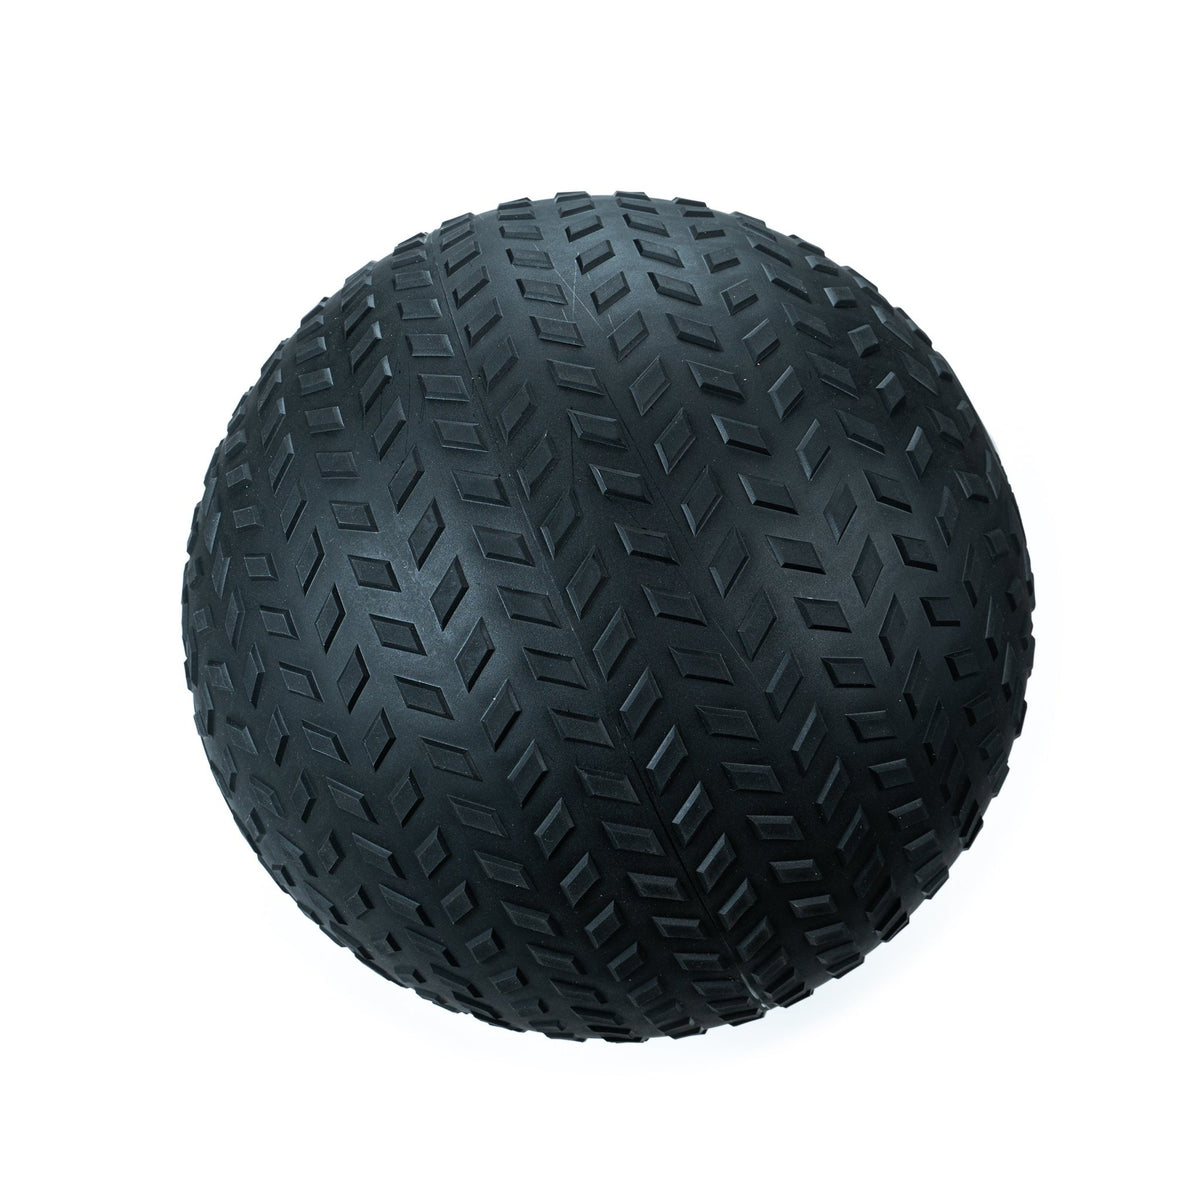 FitWay Equip. Max Grip Slam Ball - 20 Lbs